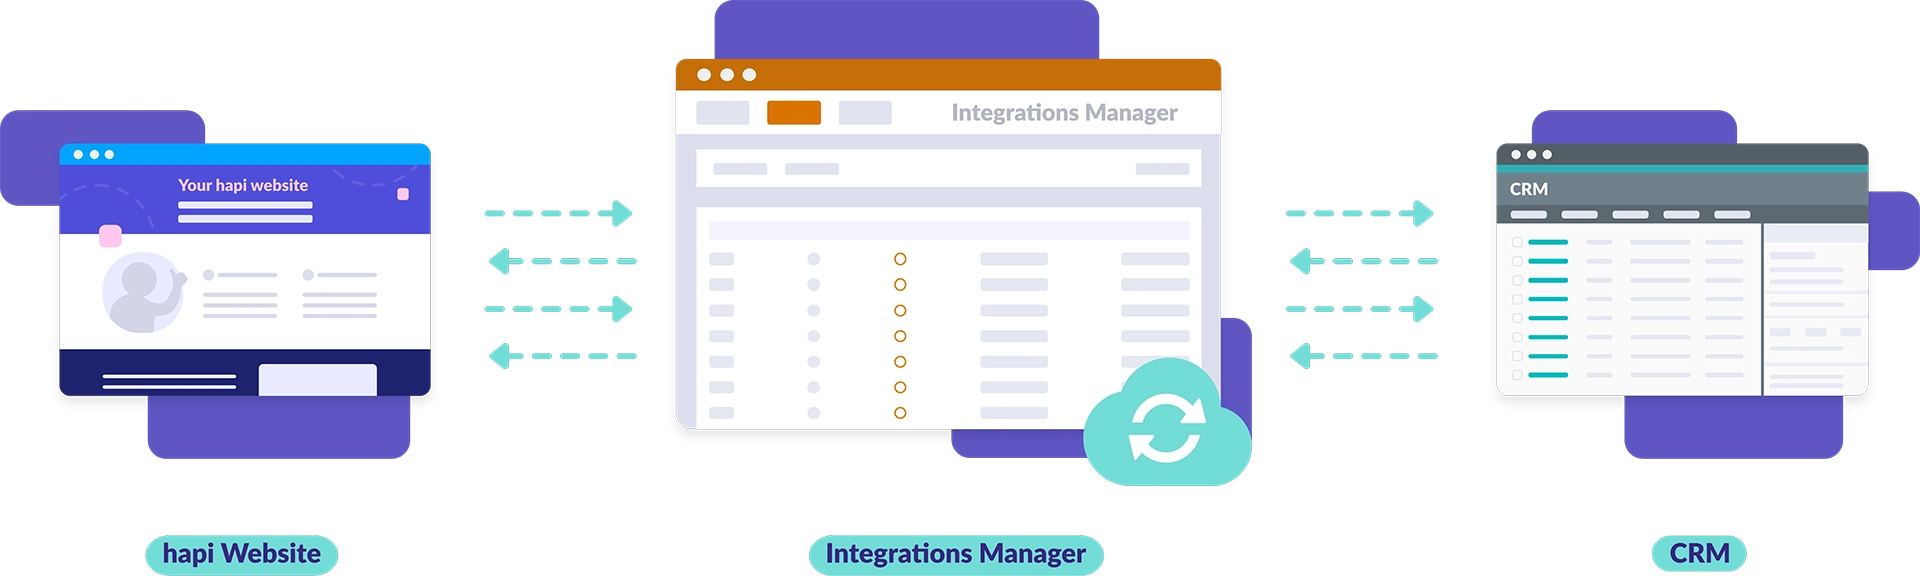 integrations manager graphic